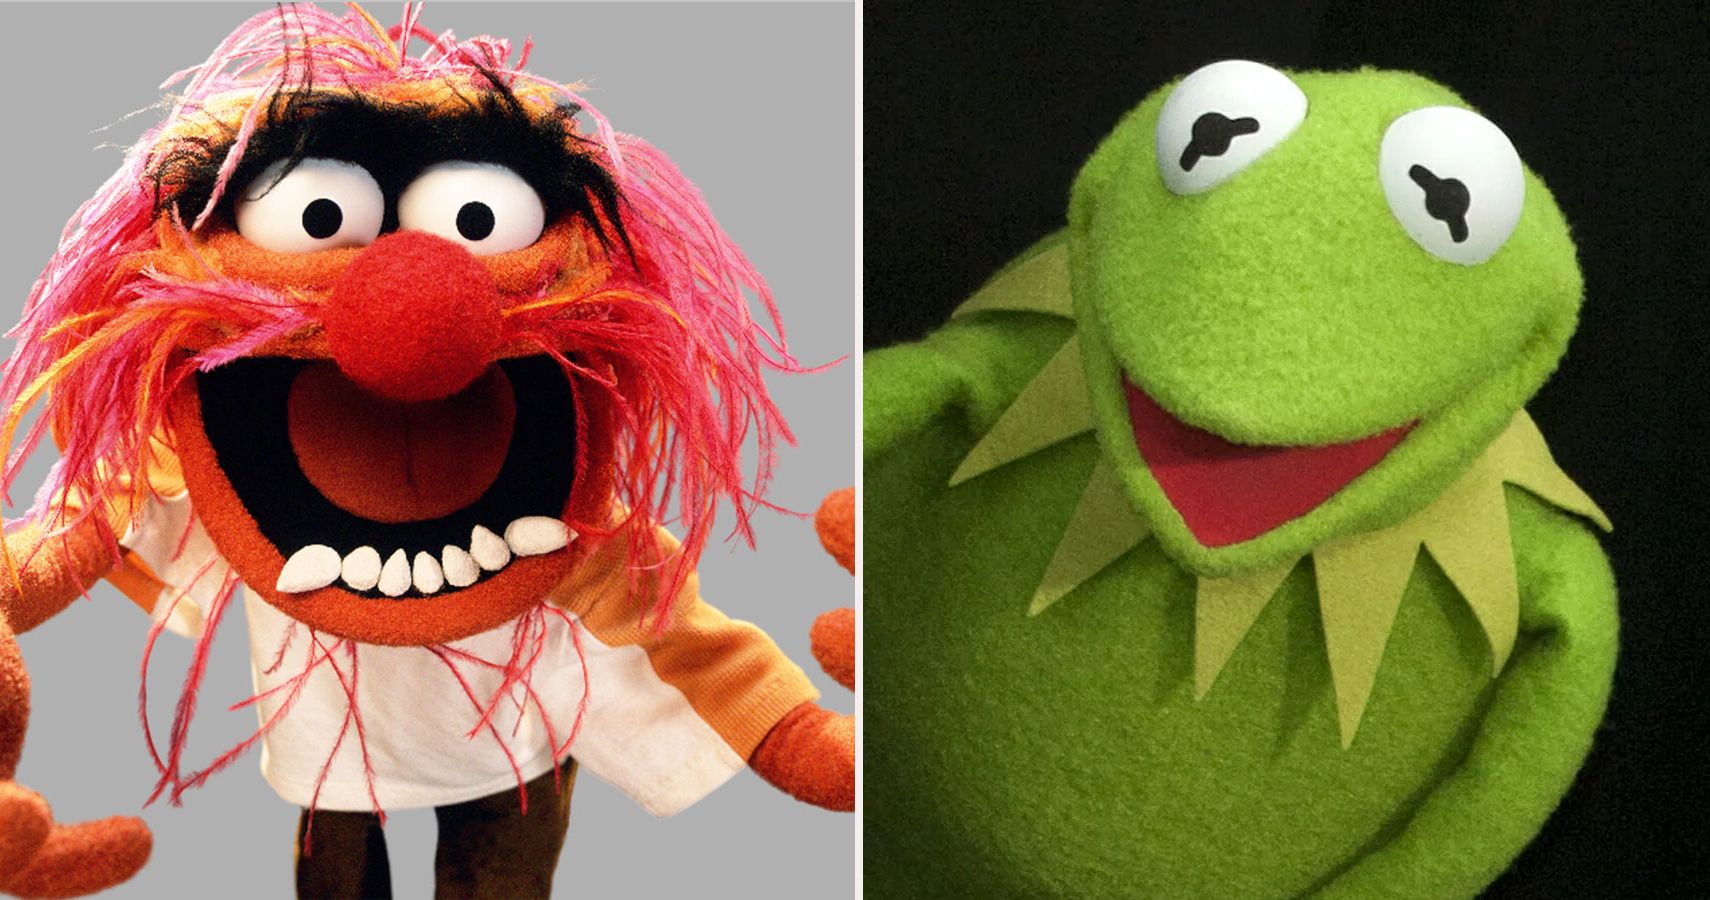 all muppets characters